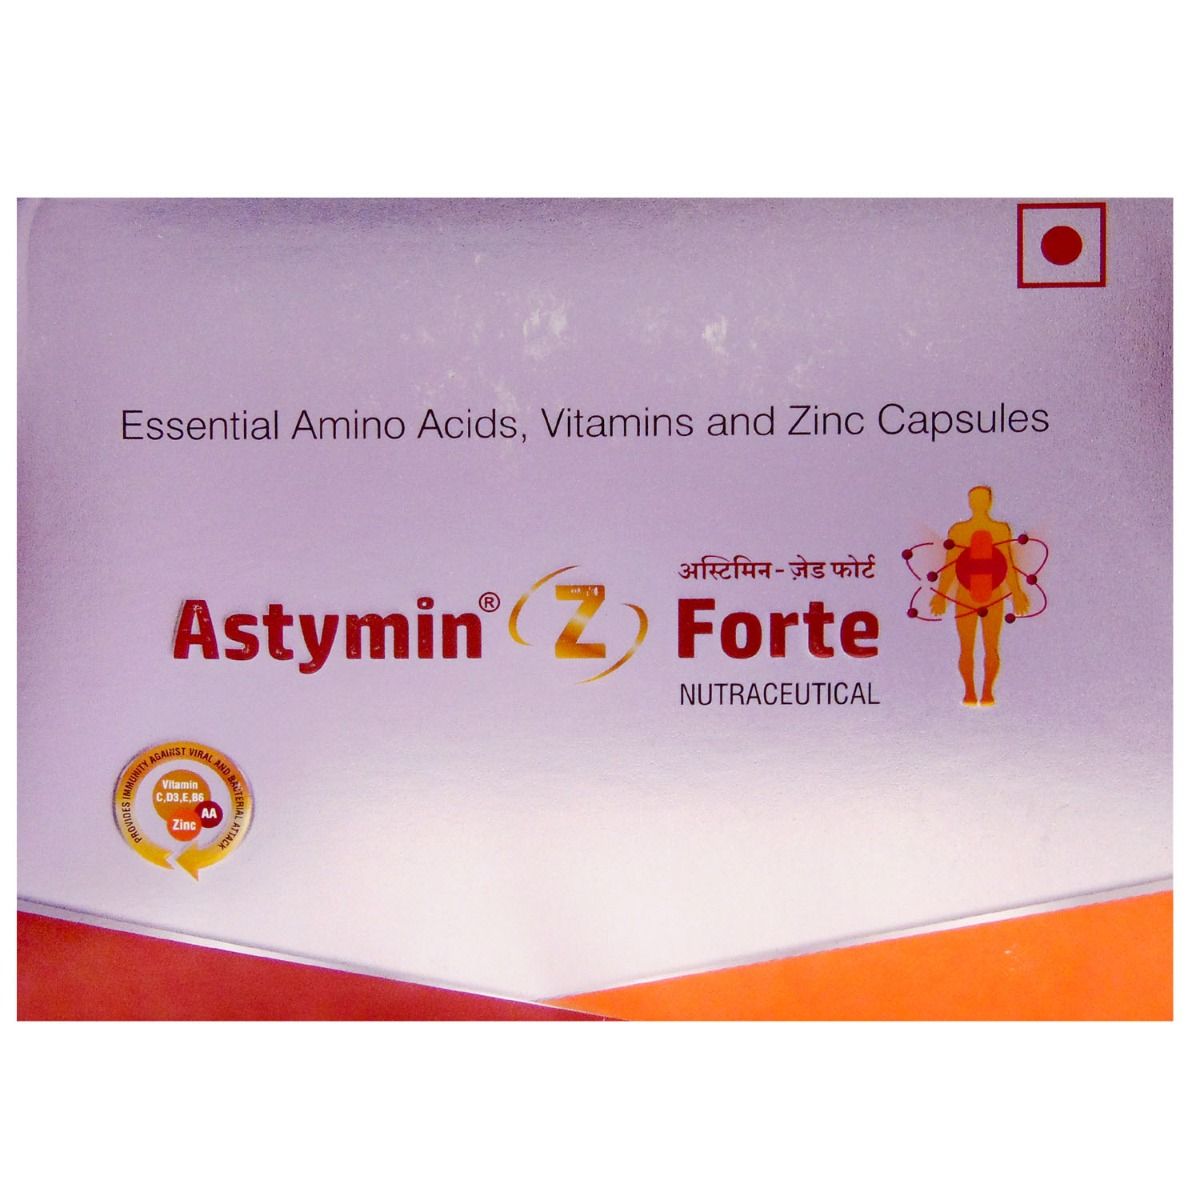 Astymin Z Forte Capsule 2 x 15's Price, Uses, Side Effects, Composition ...